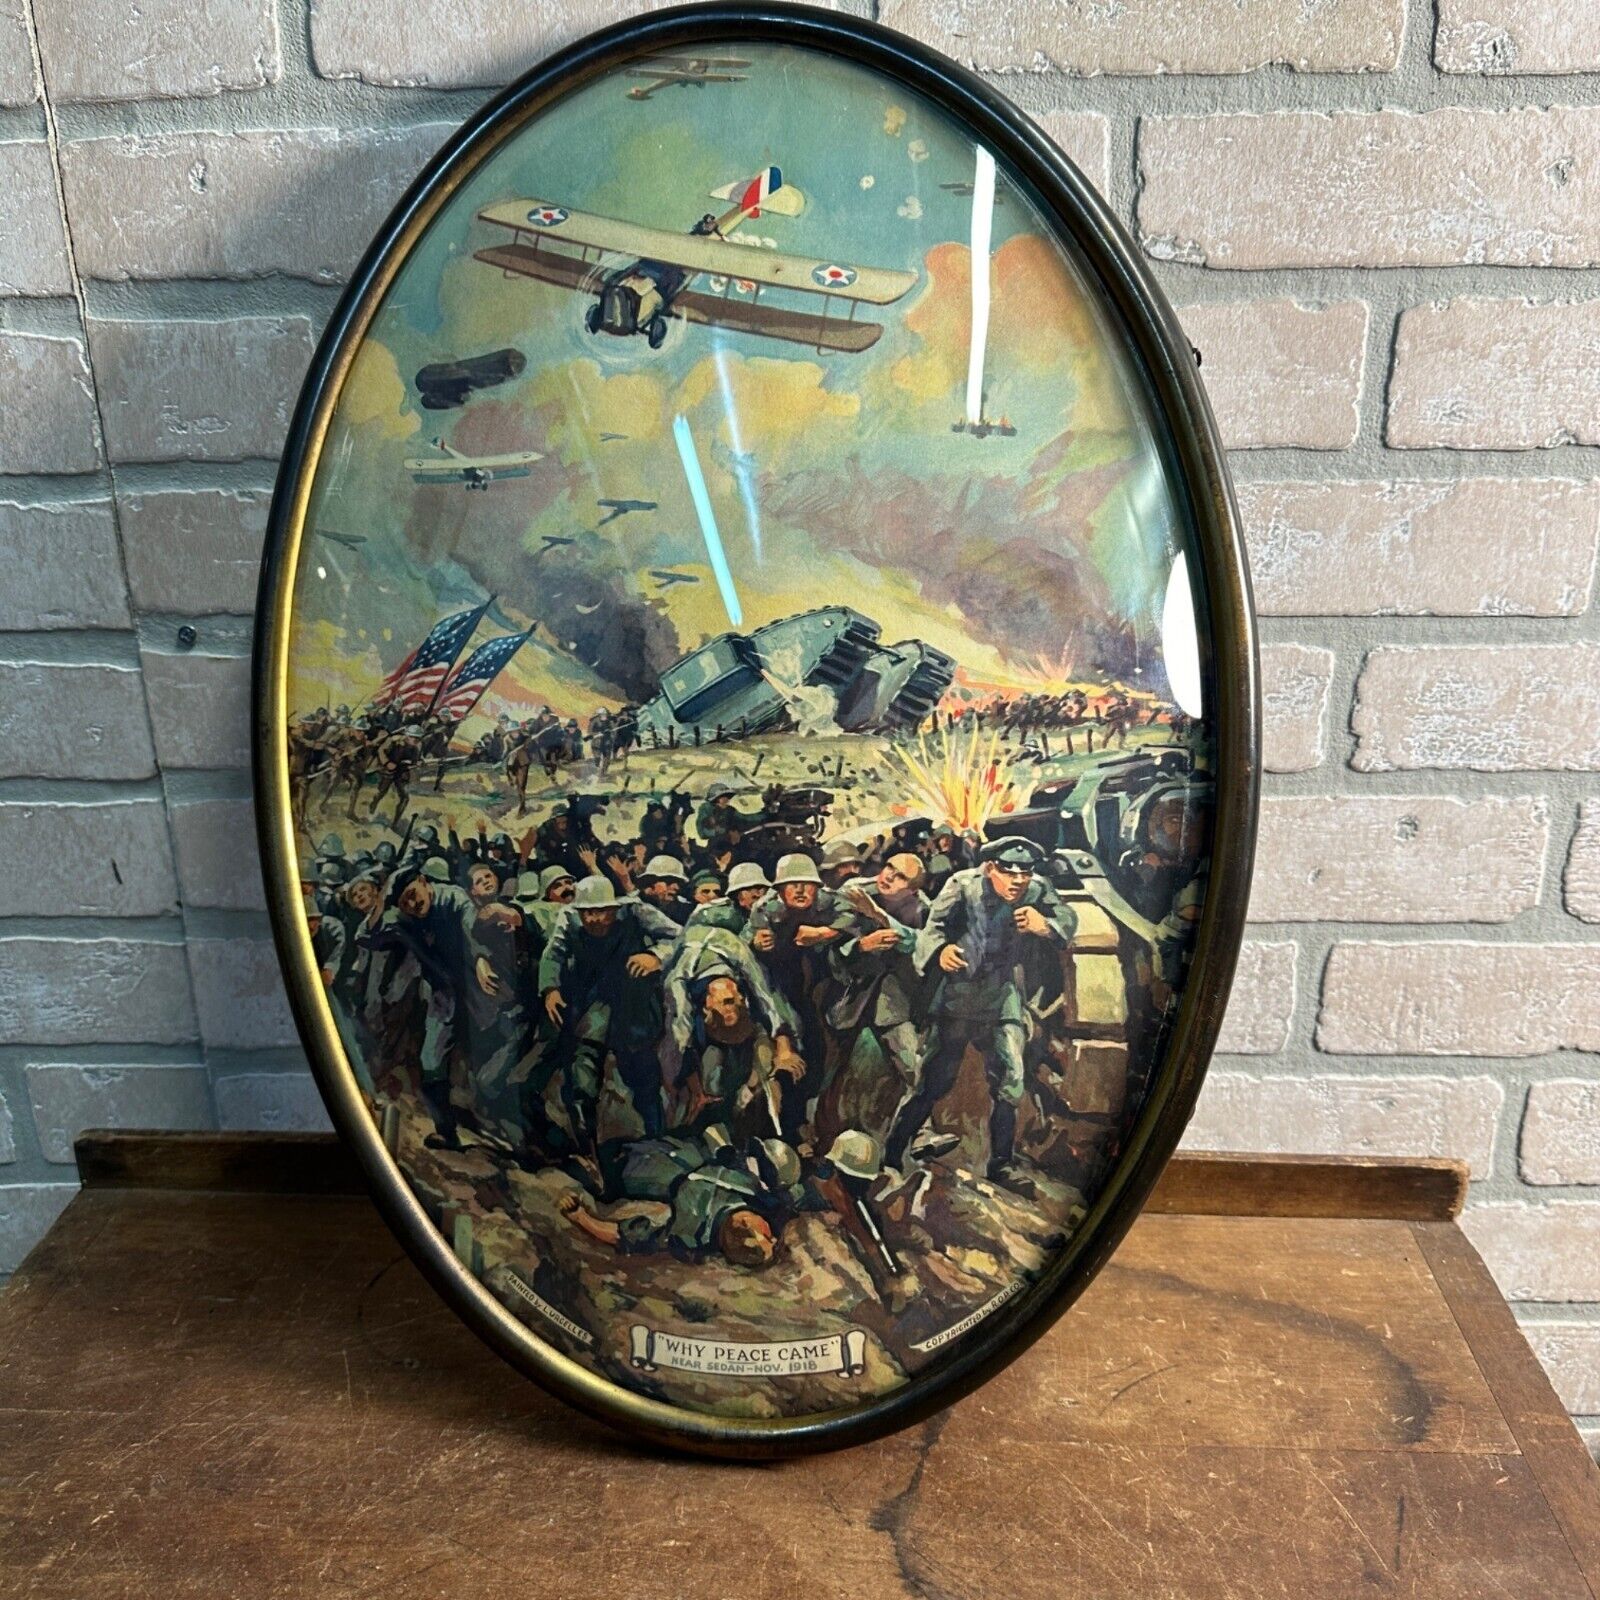 ANTIQUE 1918 WWI MILITARY WHY PEACE CAME BY LURCELLES PRINT PICTURE OVAL FRAME